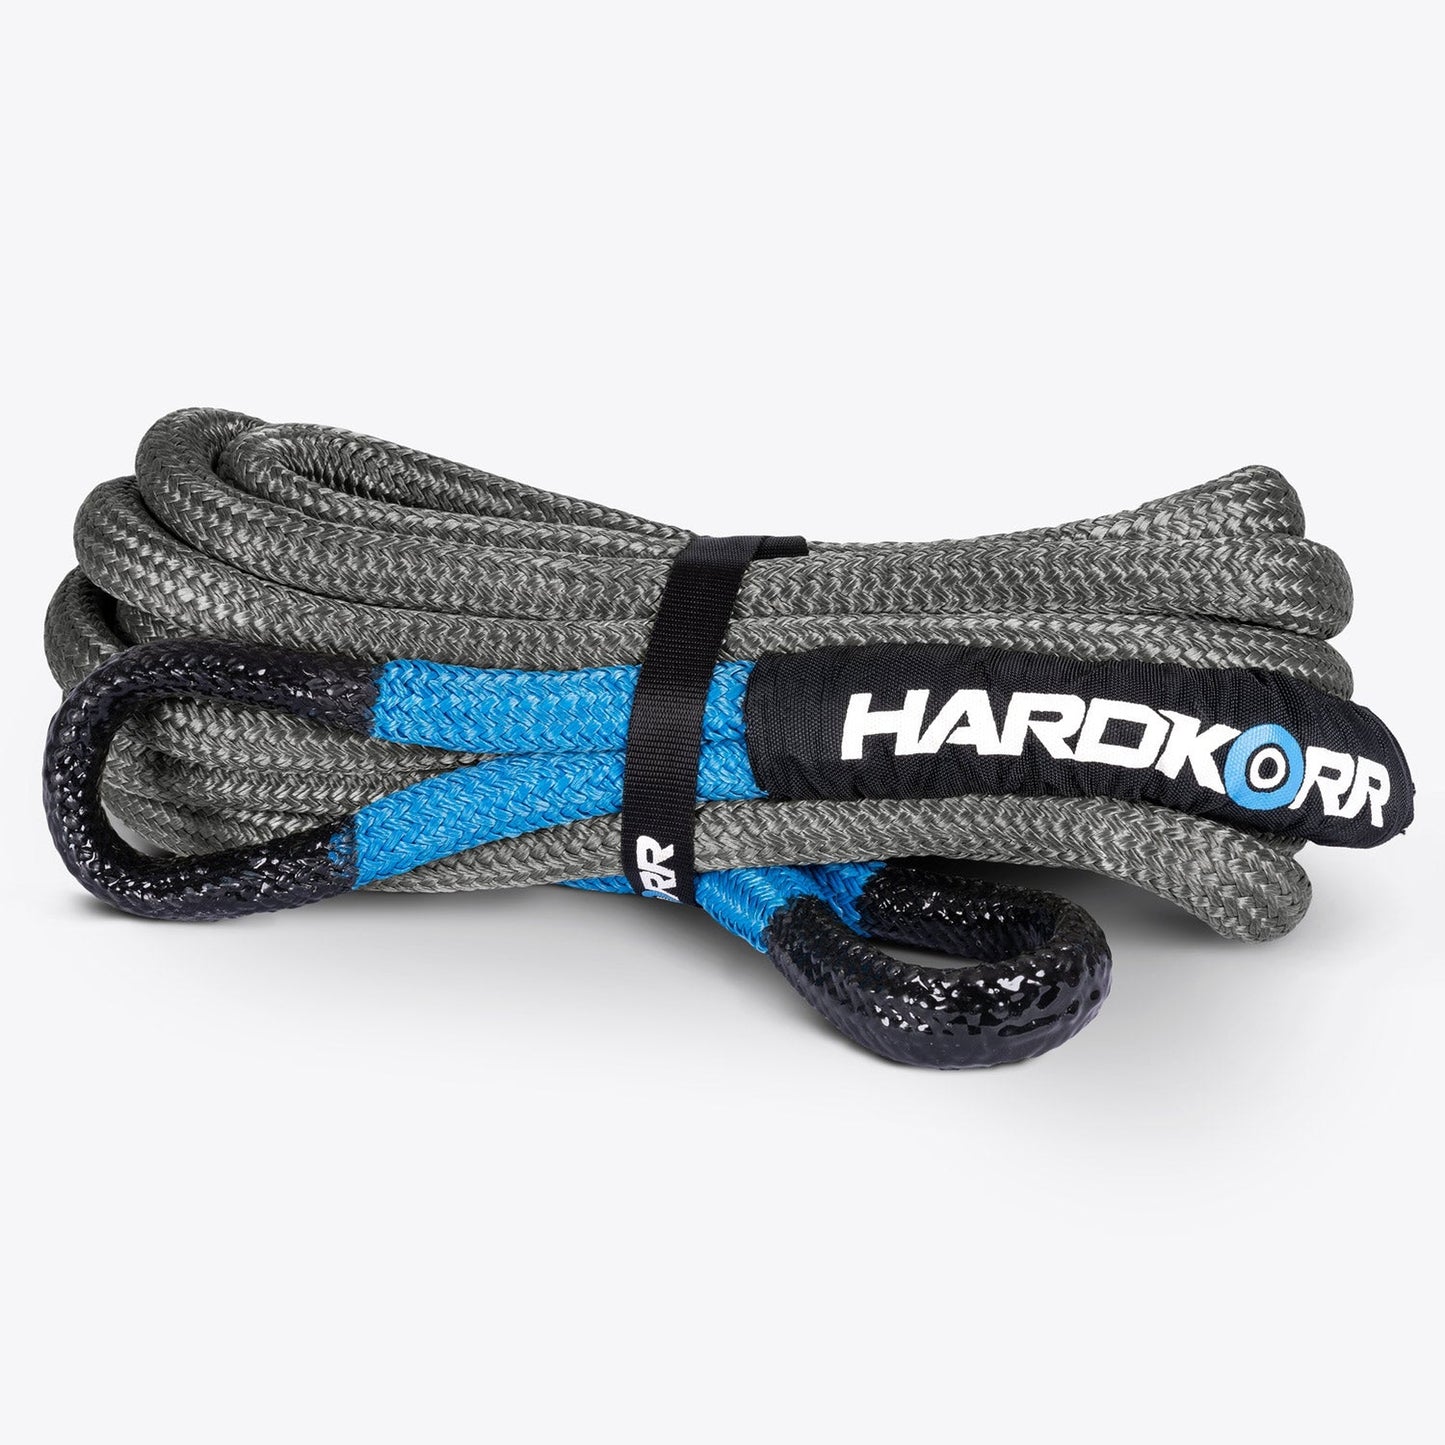 Hard Korr 3M Kinetic Recovery Rope